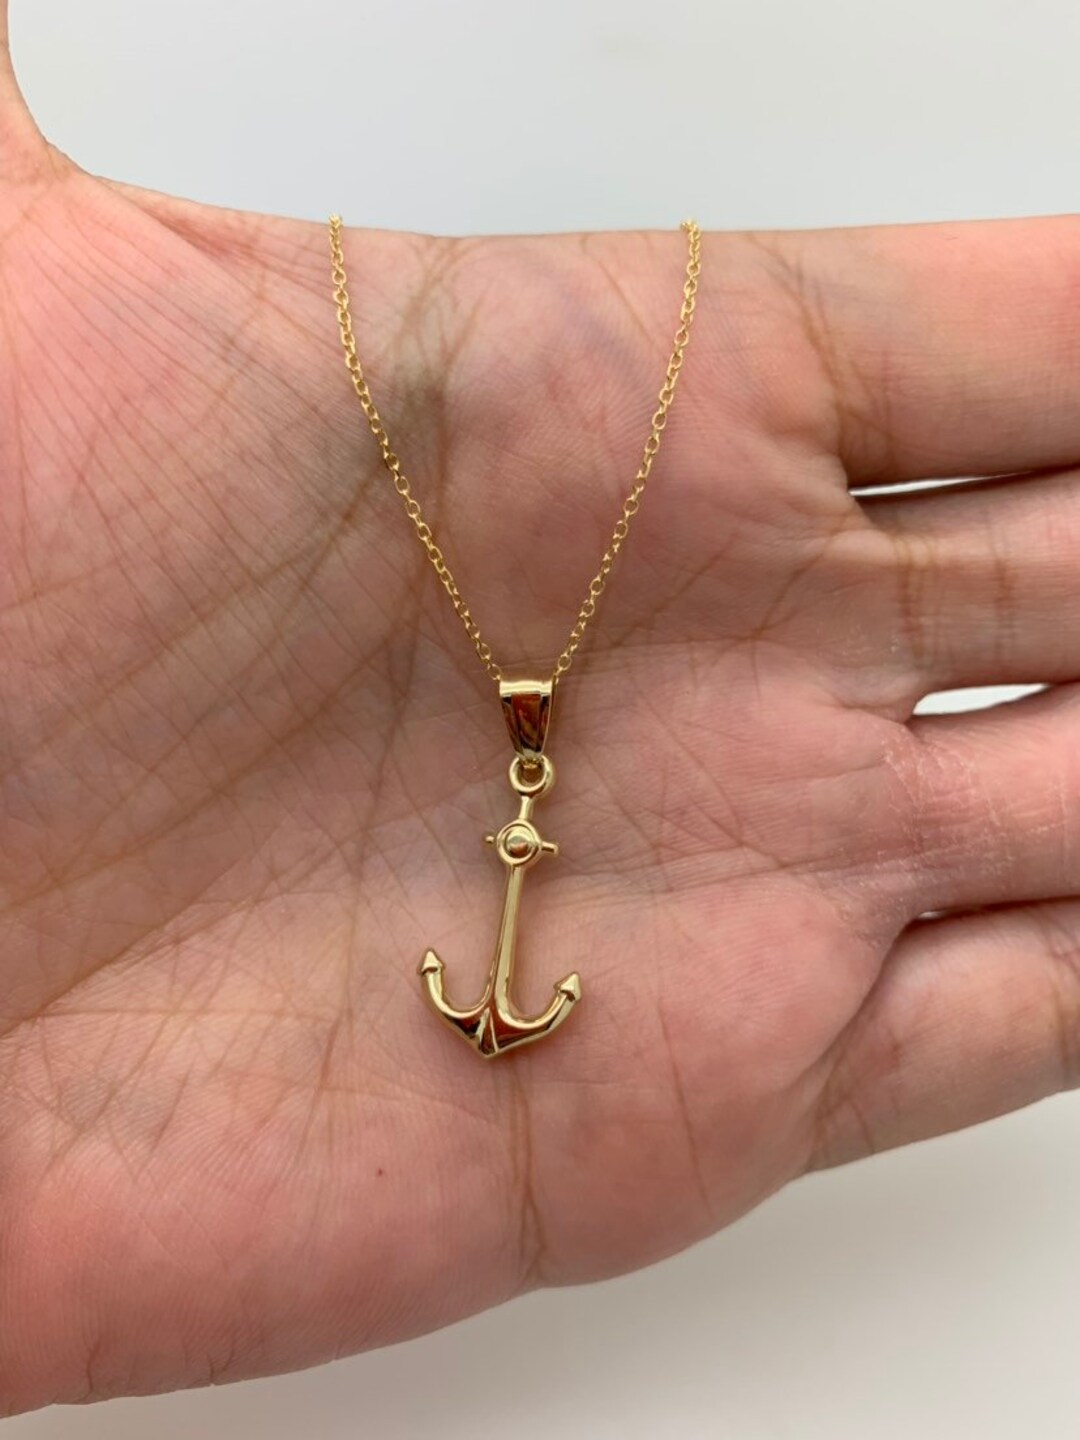 Gold Anchor Necklace - Gracefully Made